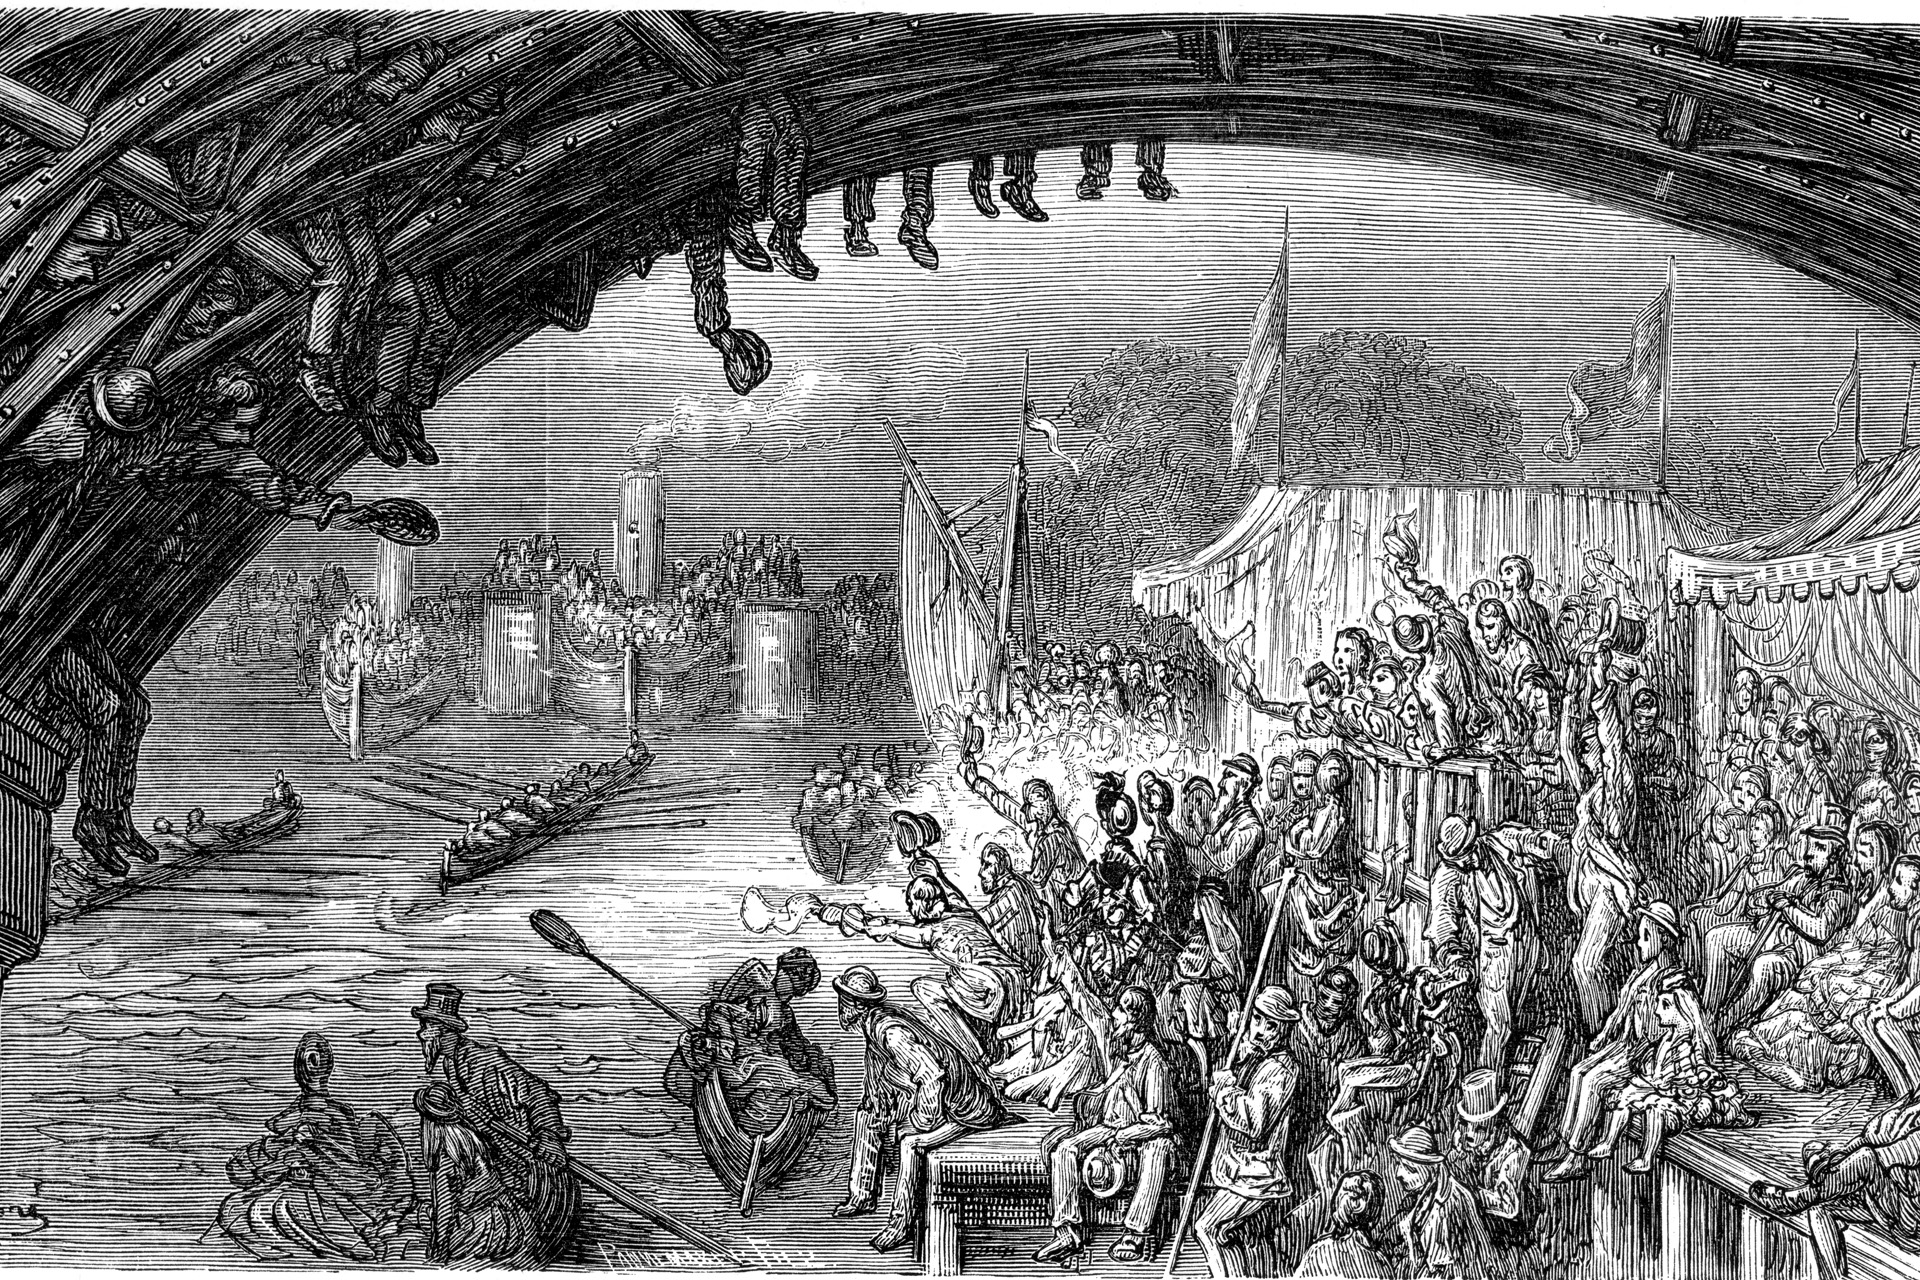 Vintage engraving showing a scene from 19th Century London England. A large crowd of people gather to watch the boat race on the Thames some on the beams under Barnes Bridge.